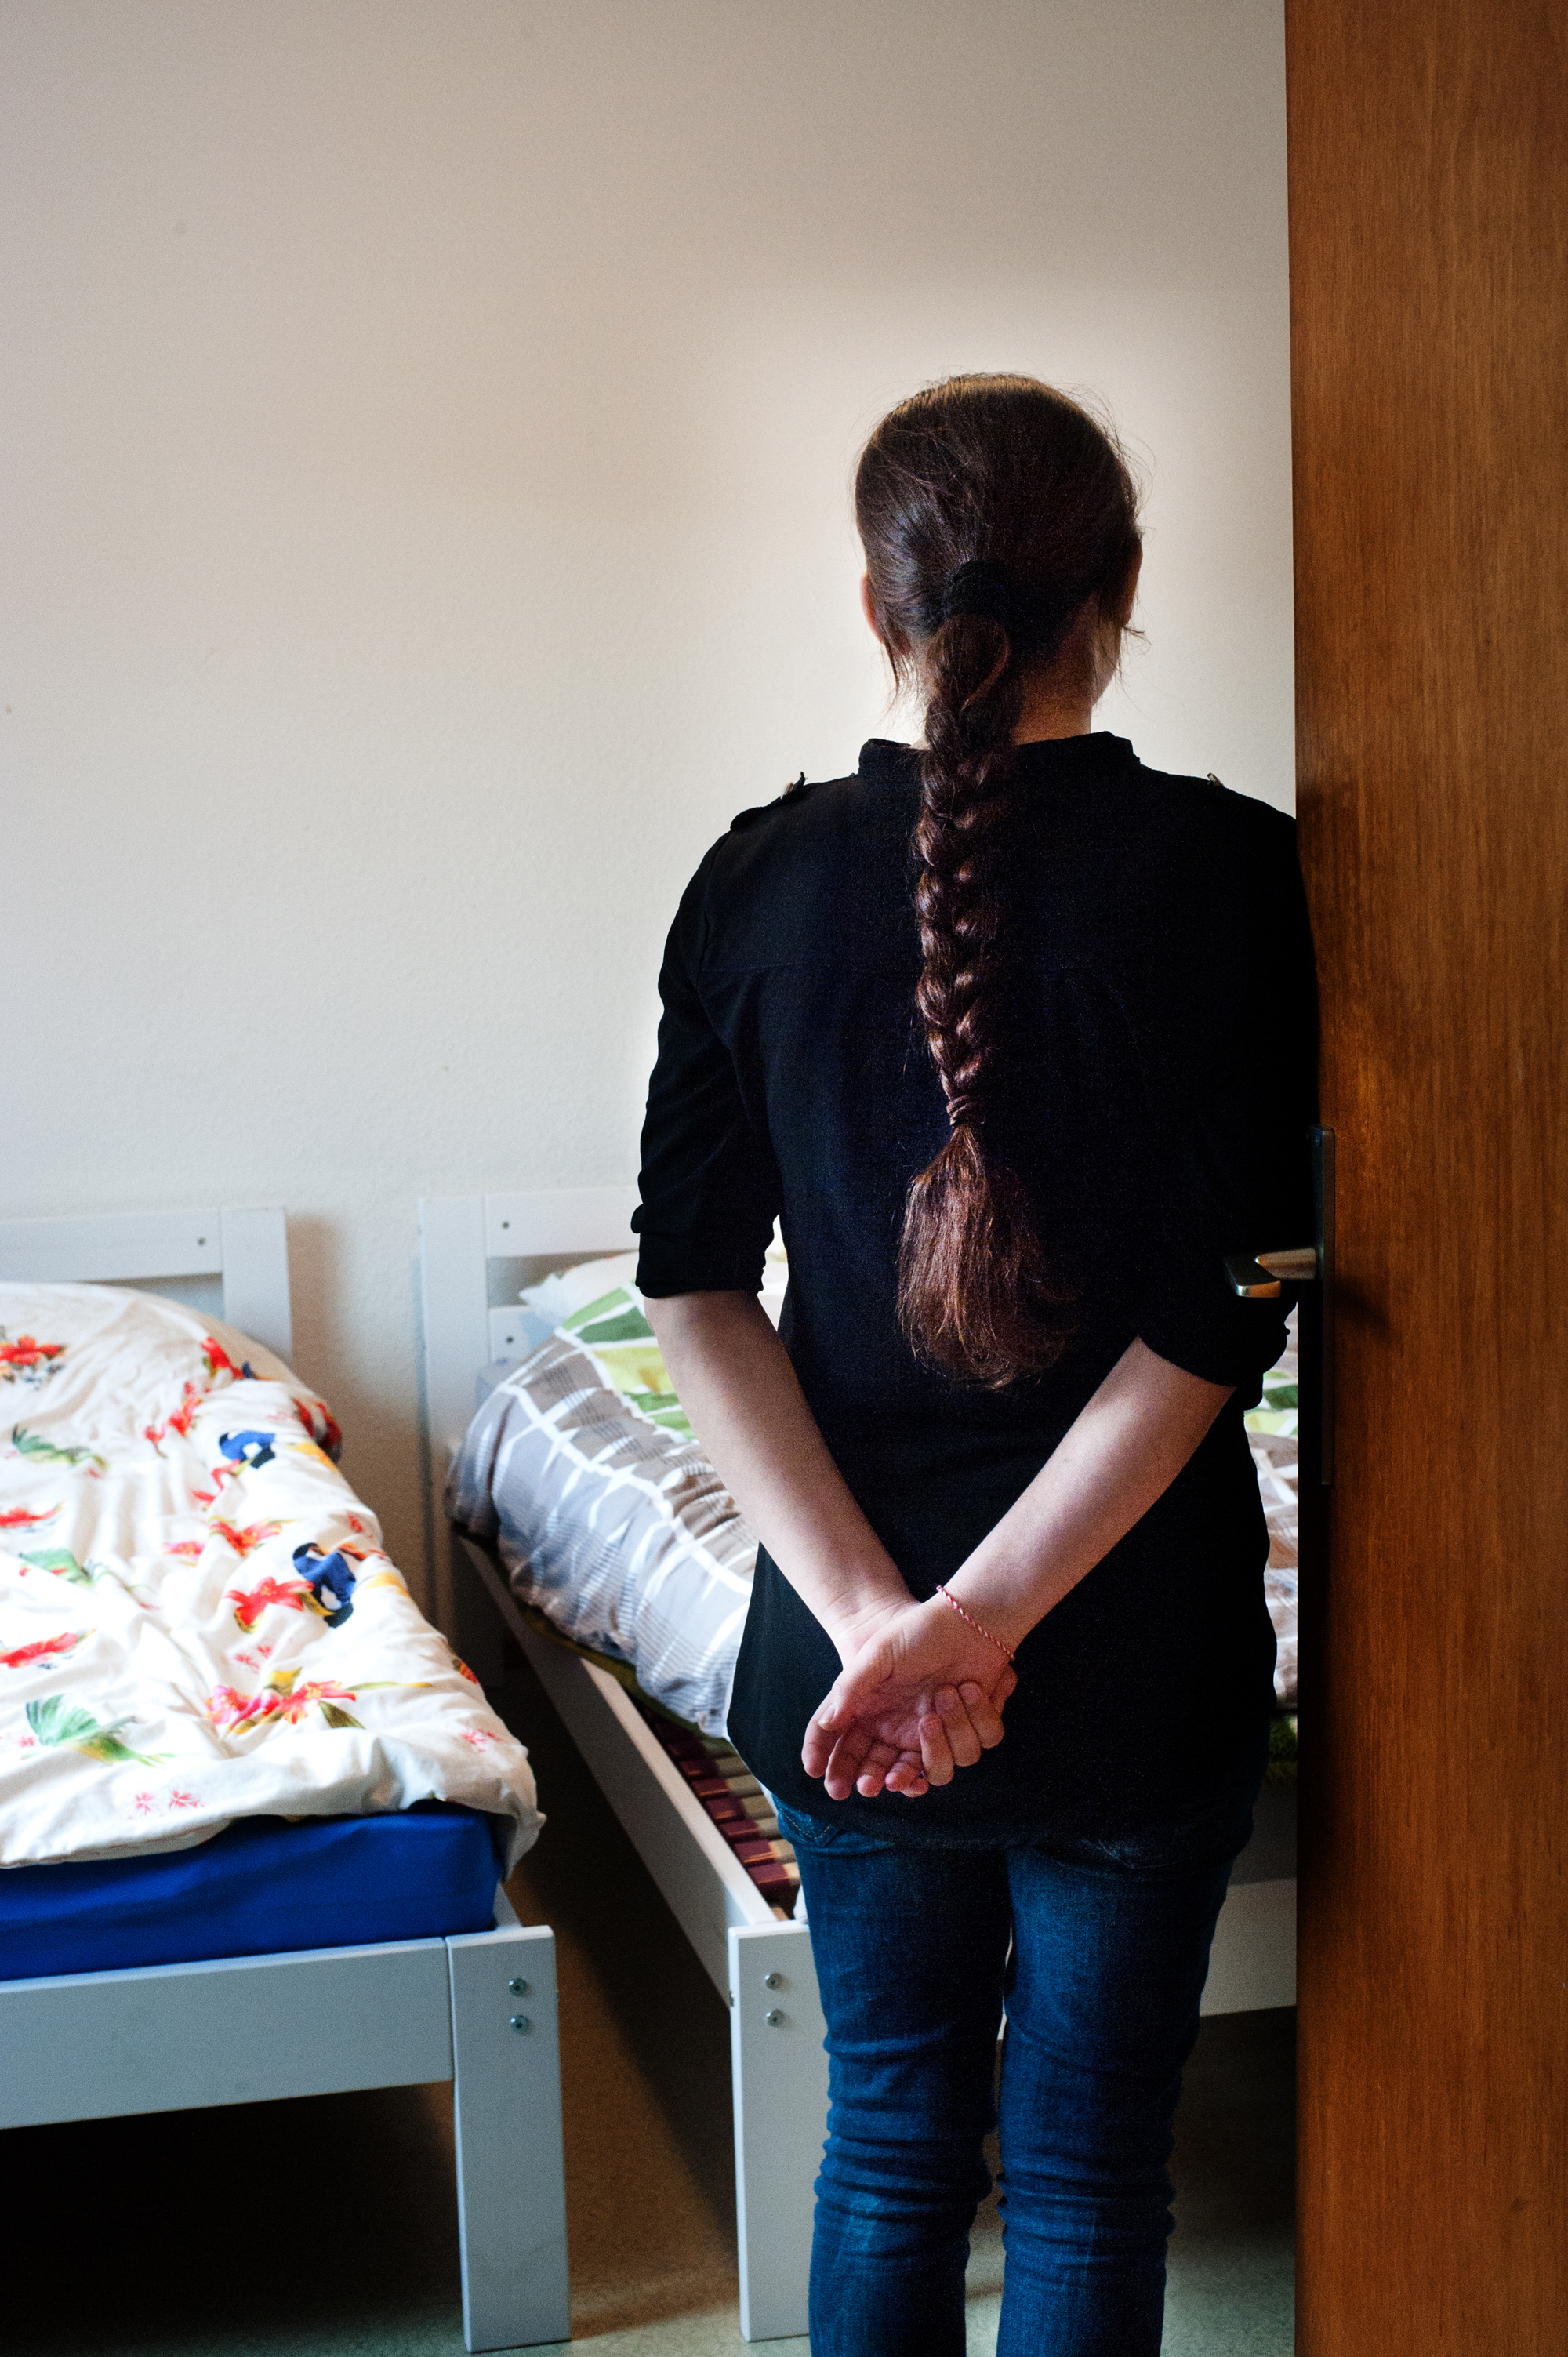 Rana, 15, lives in a village in southern Germany after escaping ISIL captivity [Mona van den Berg/Al Jazeera]